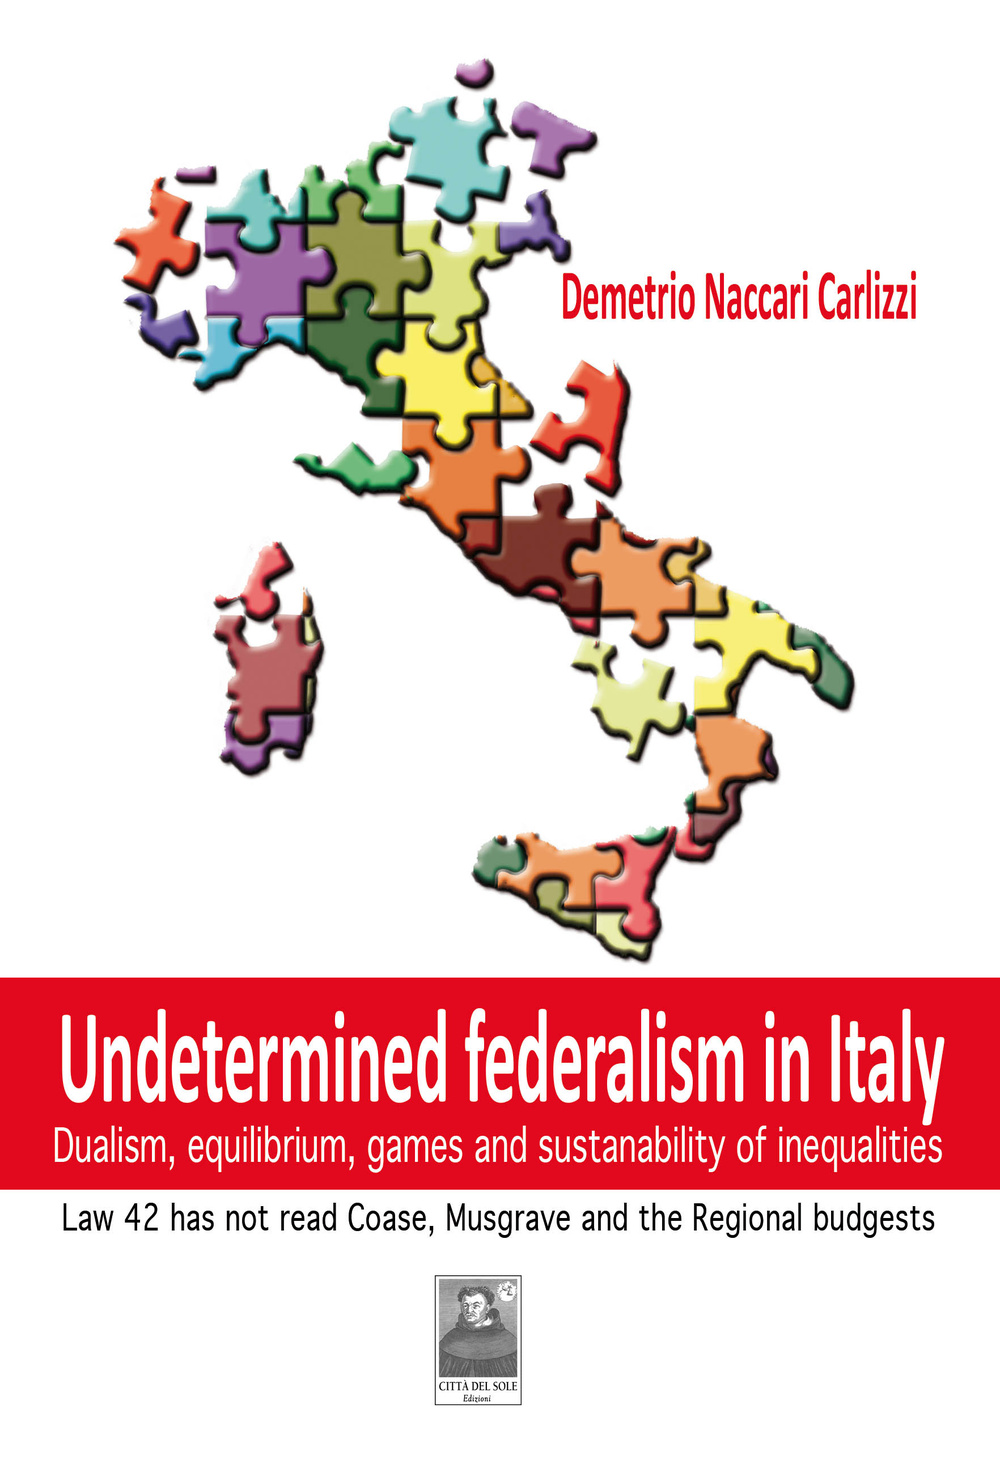 Undetermined federalism in Italy. Dualism, equilibrium, games and sustanability of inequalities